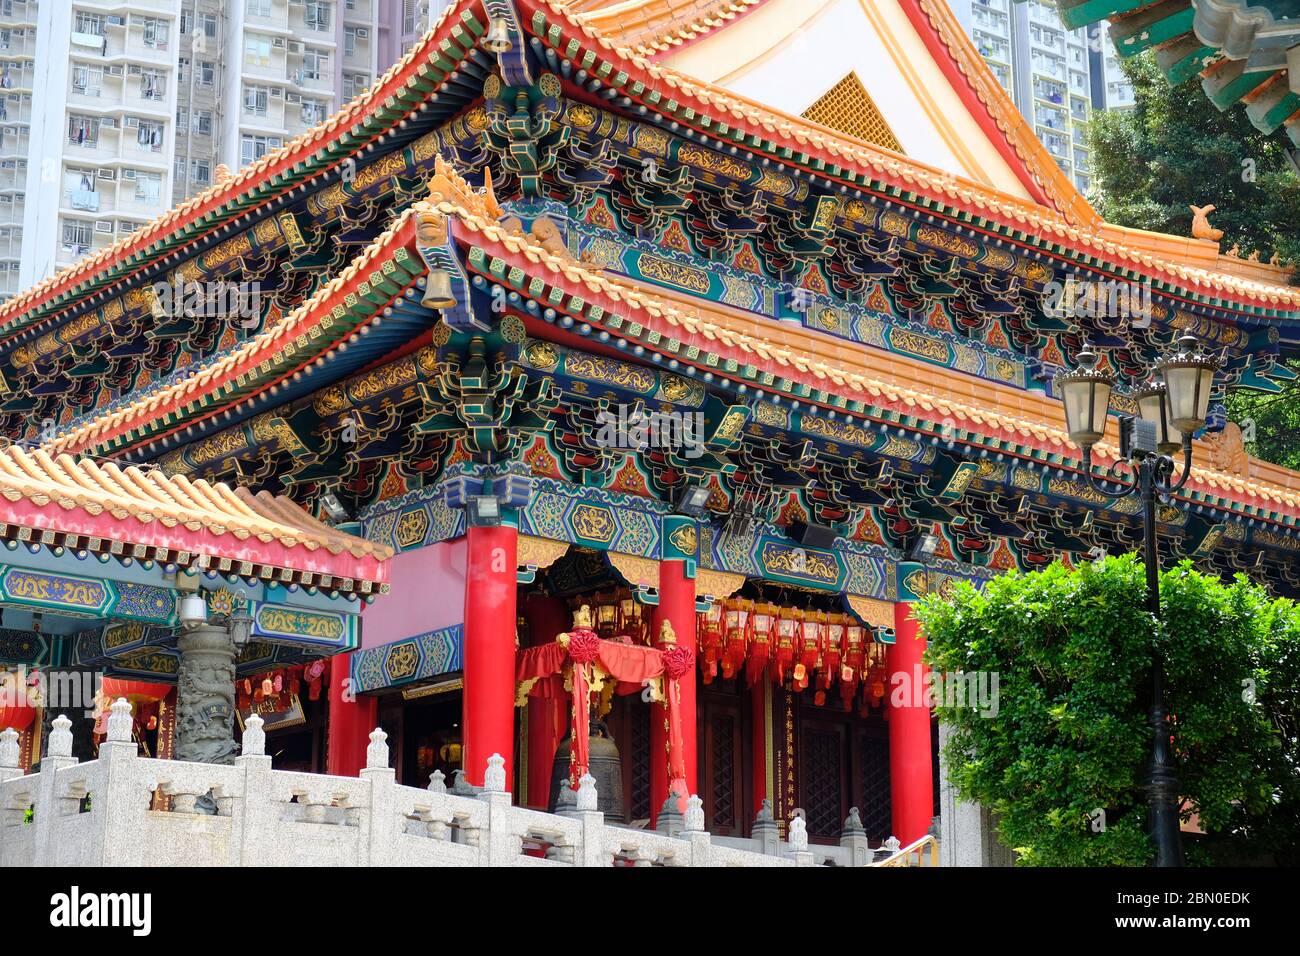 Hong Kong China - Sik Sik Yuen Wong Tai Sin Temple, three religions Temple of  Buddhism, Taoism and Confucianism Stock Photo